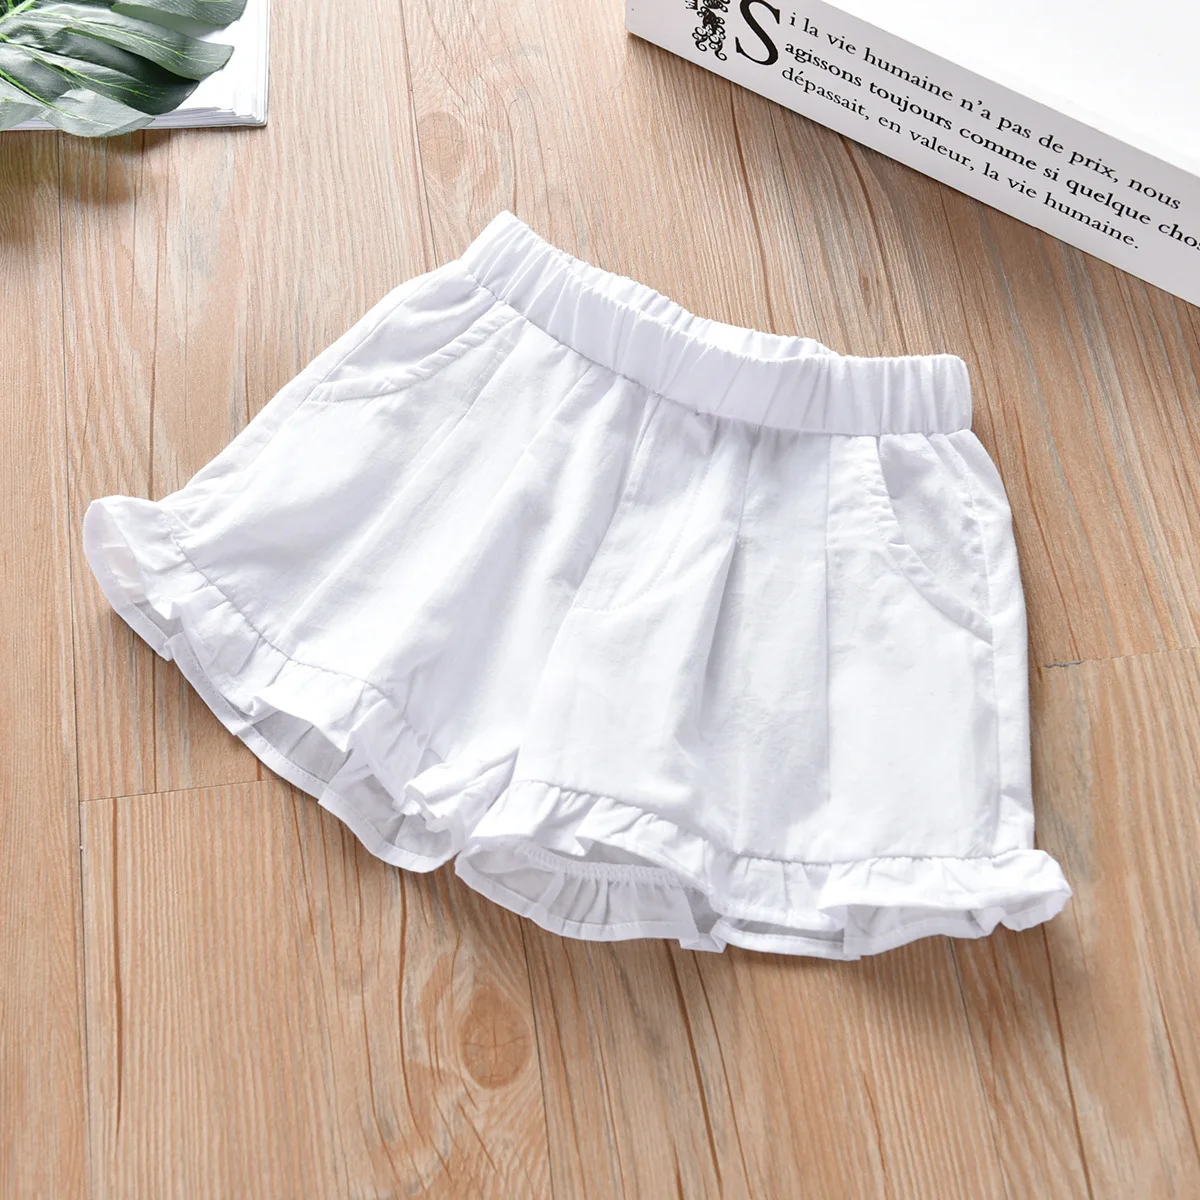 Children Kids Baby Shorts Summer Elastic Cotton Trousers Fashion Baby Five Pants Beach Shorts For Girls Boys - Color: White